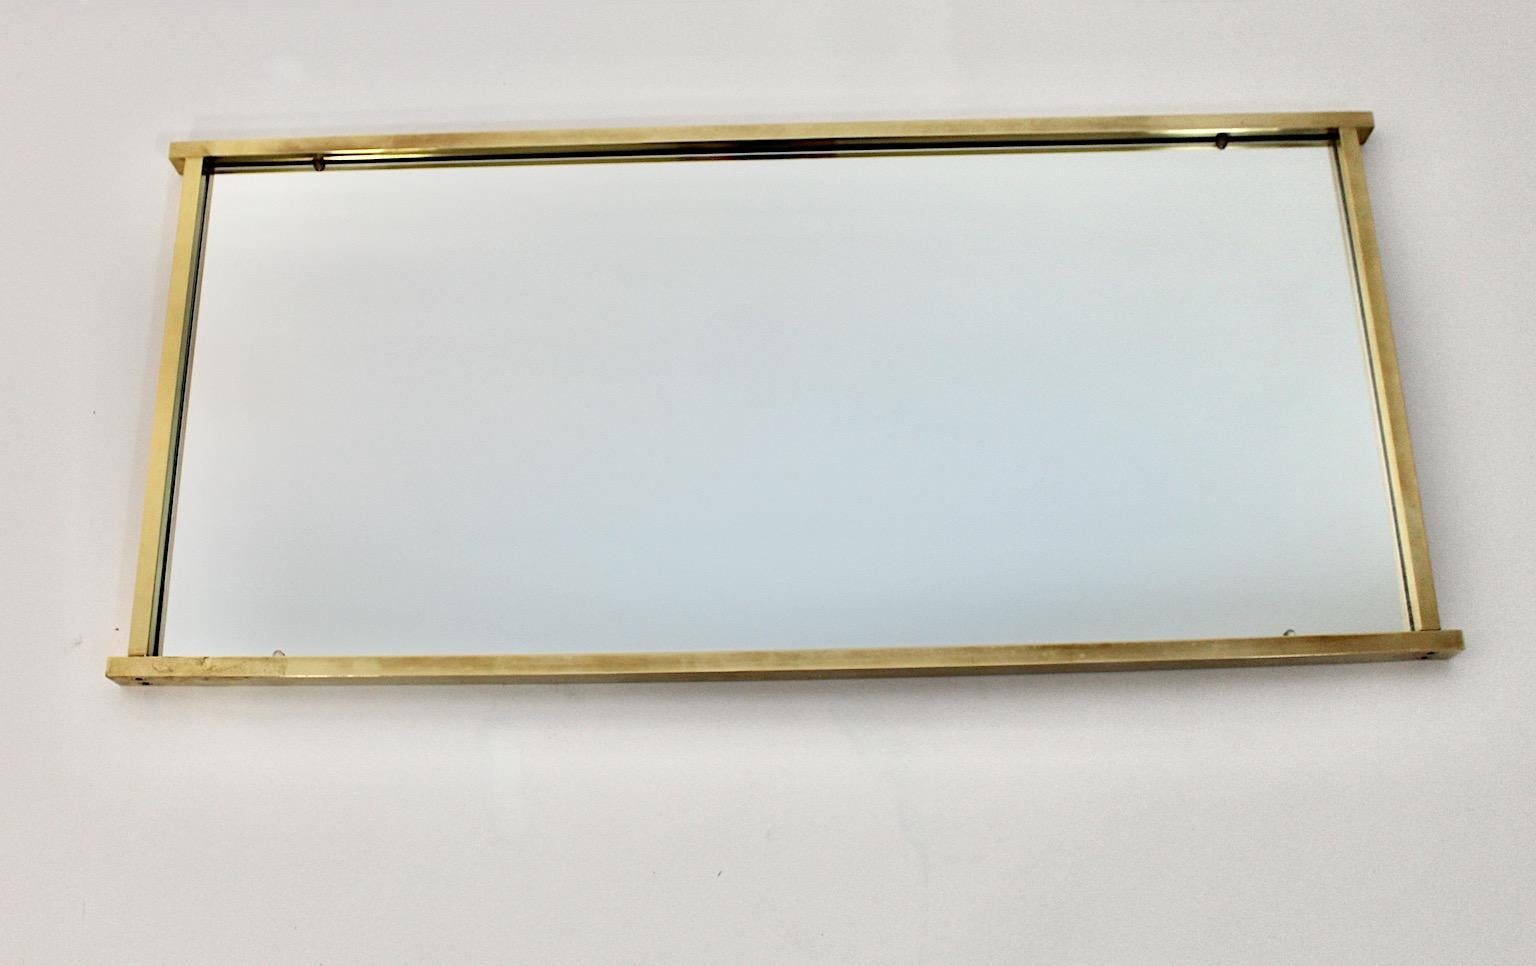 Late 20th Century Modernist Vintage Rectangular Brass Wall Mirror Floor Mirror 1970s Italy For Sale